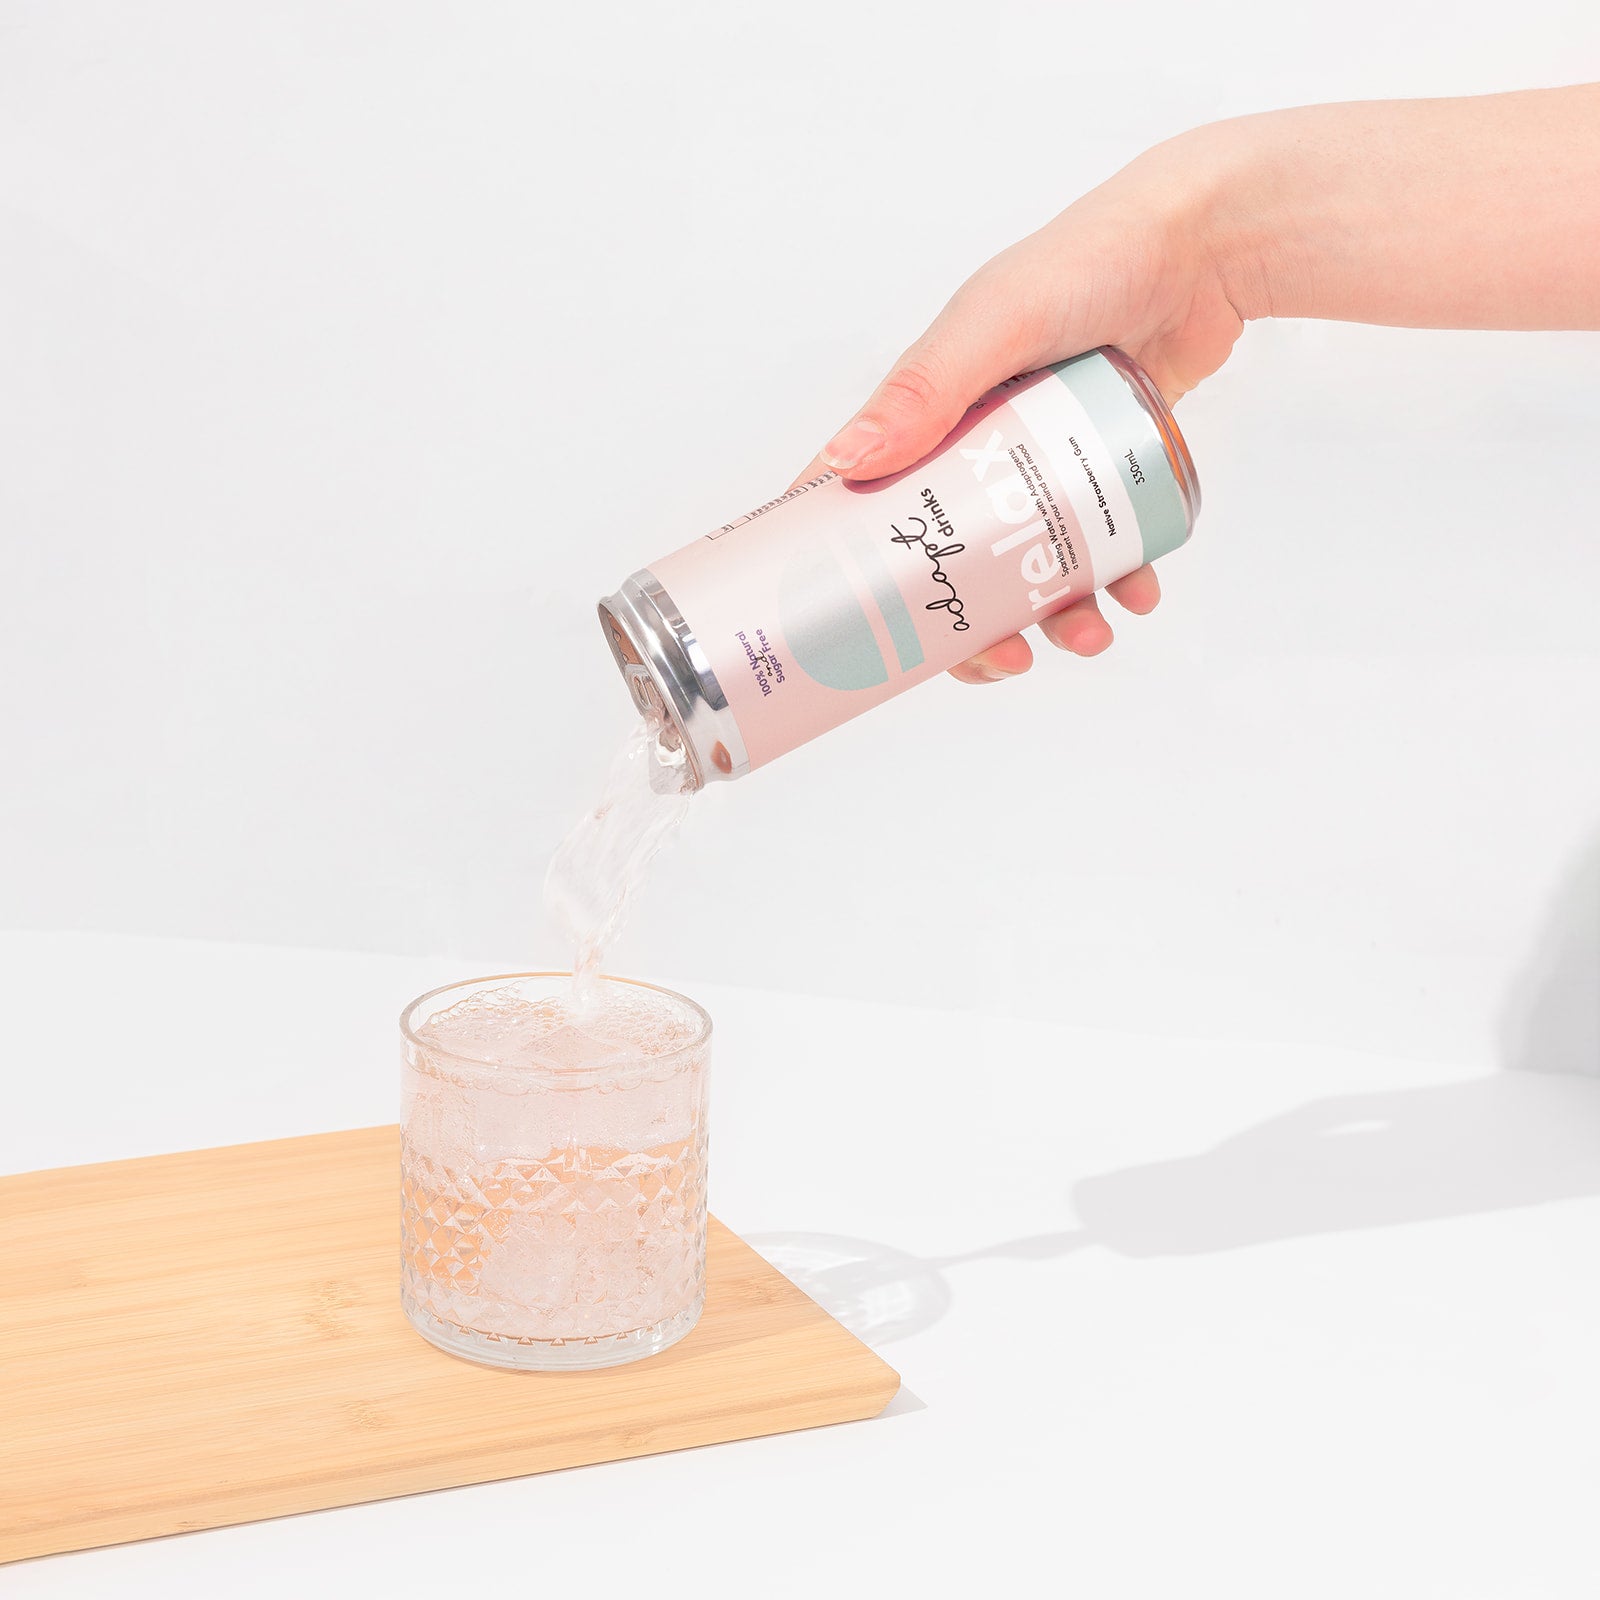 sparkling adaptogenic drinks - native strawberry gum 330mL can being poured into a short glass